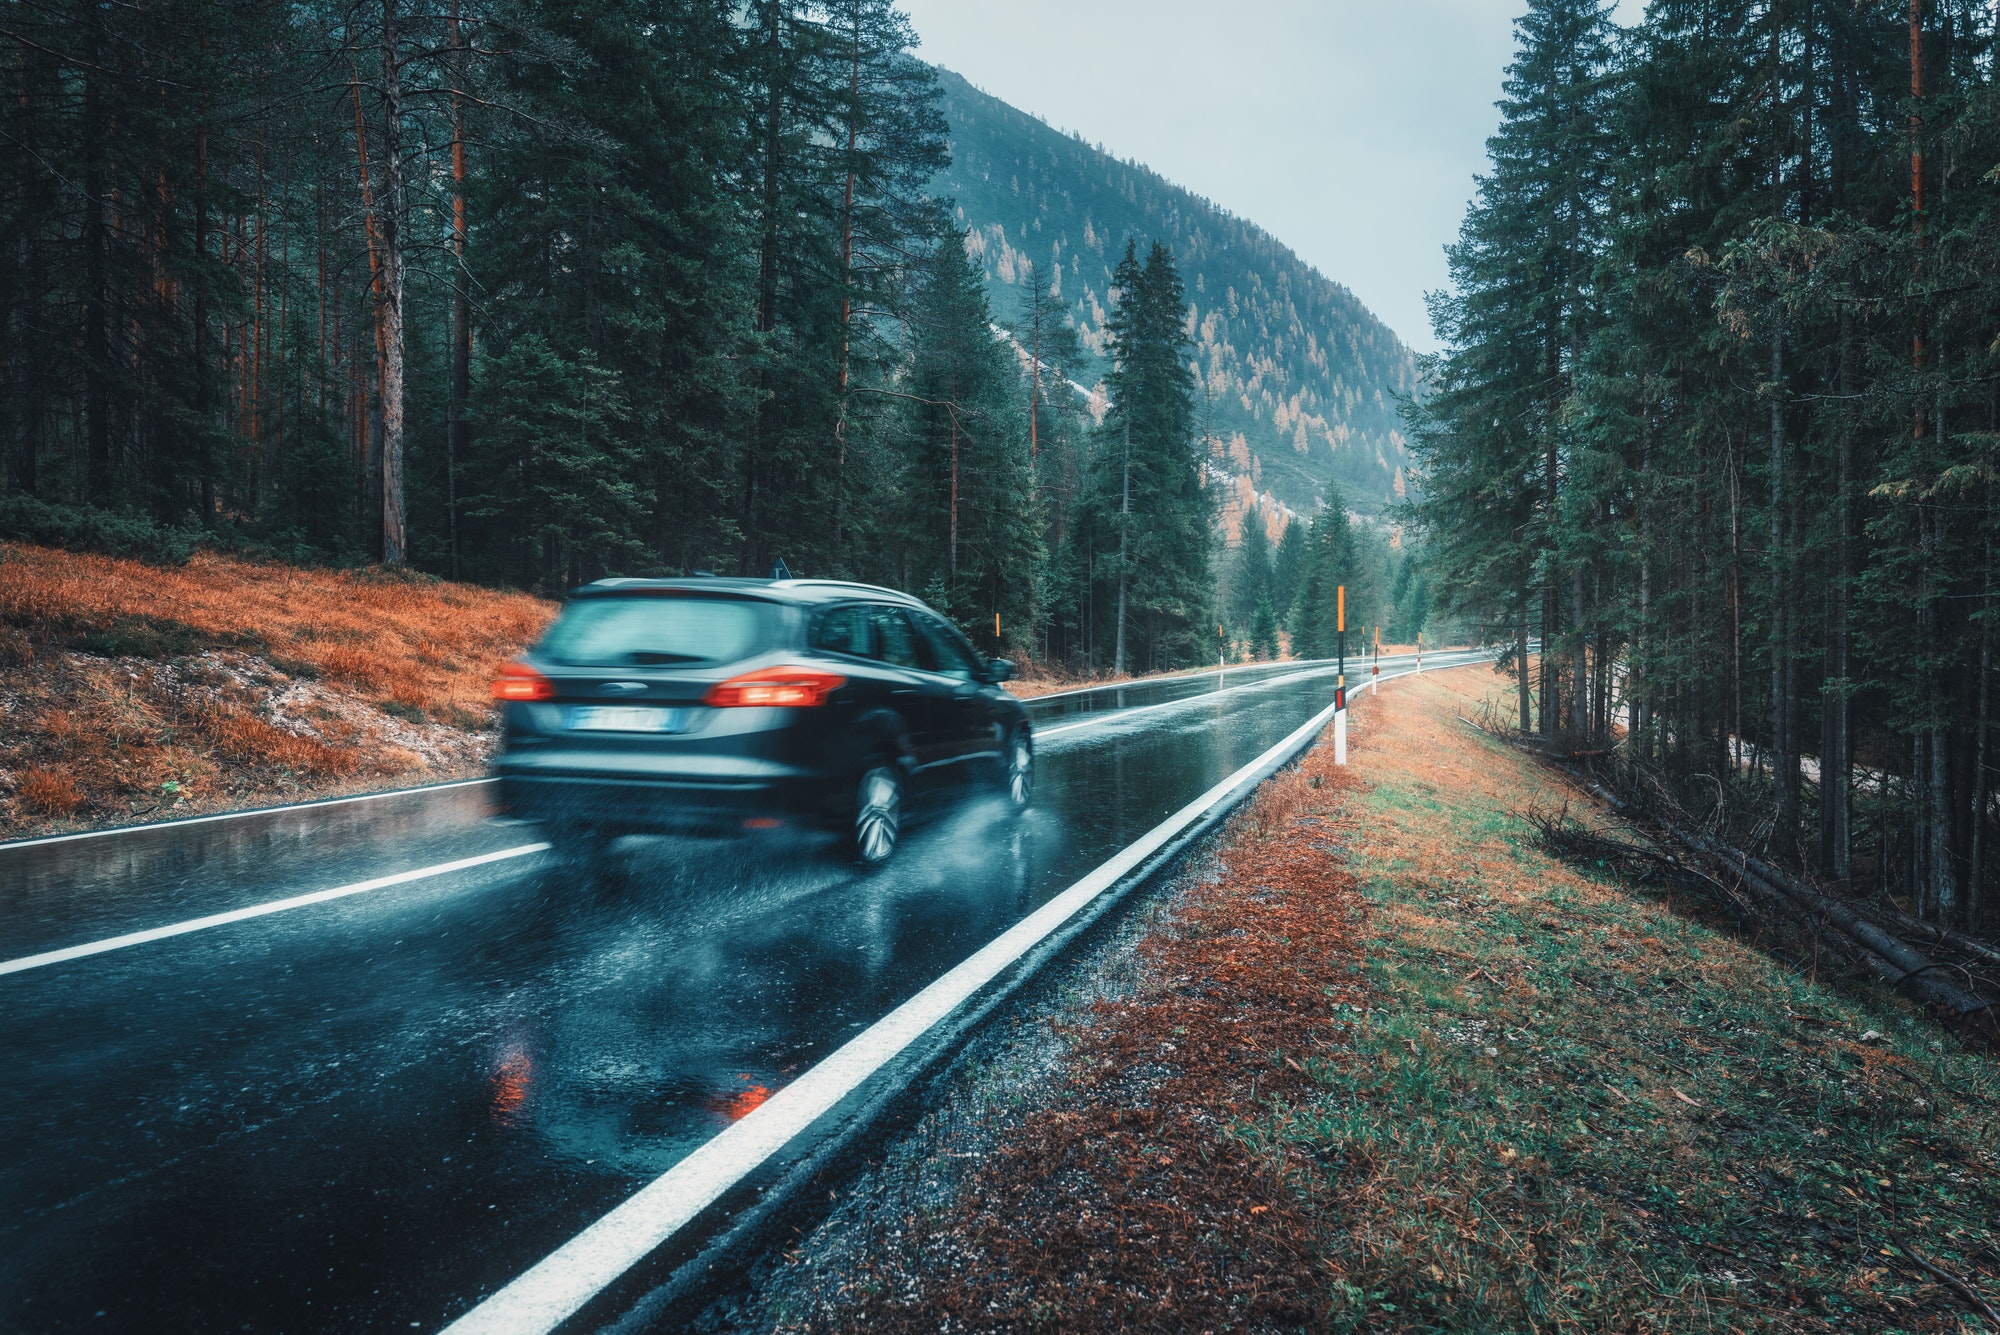 Blurred car in motion on the road in autumn forest in rain